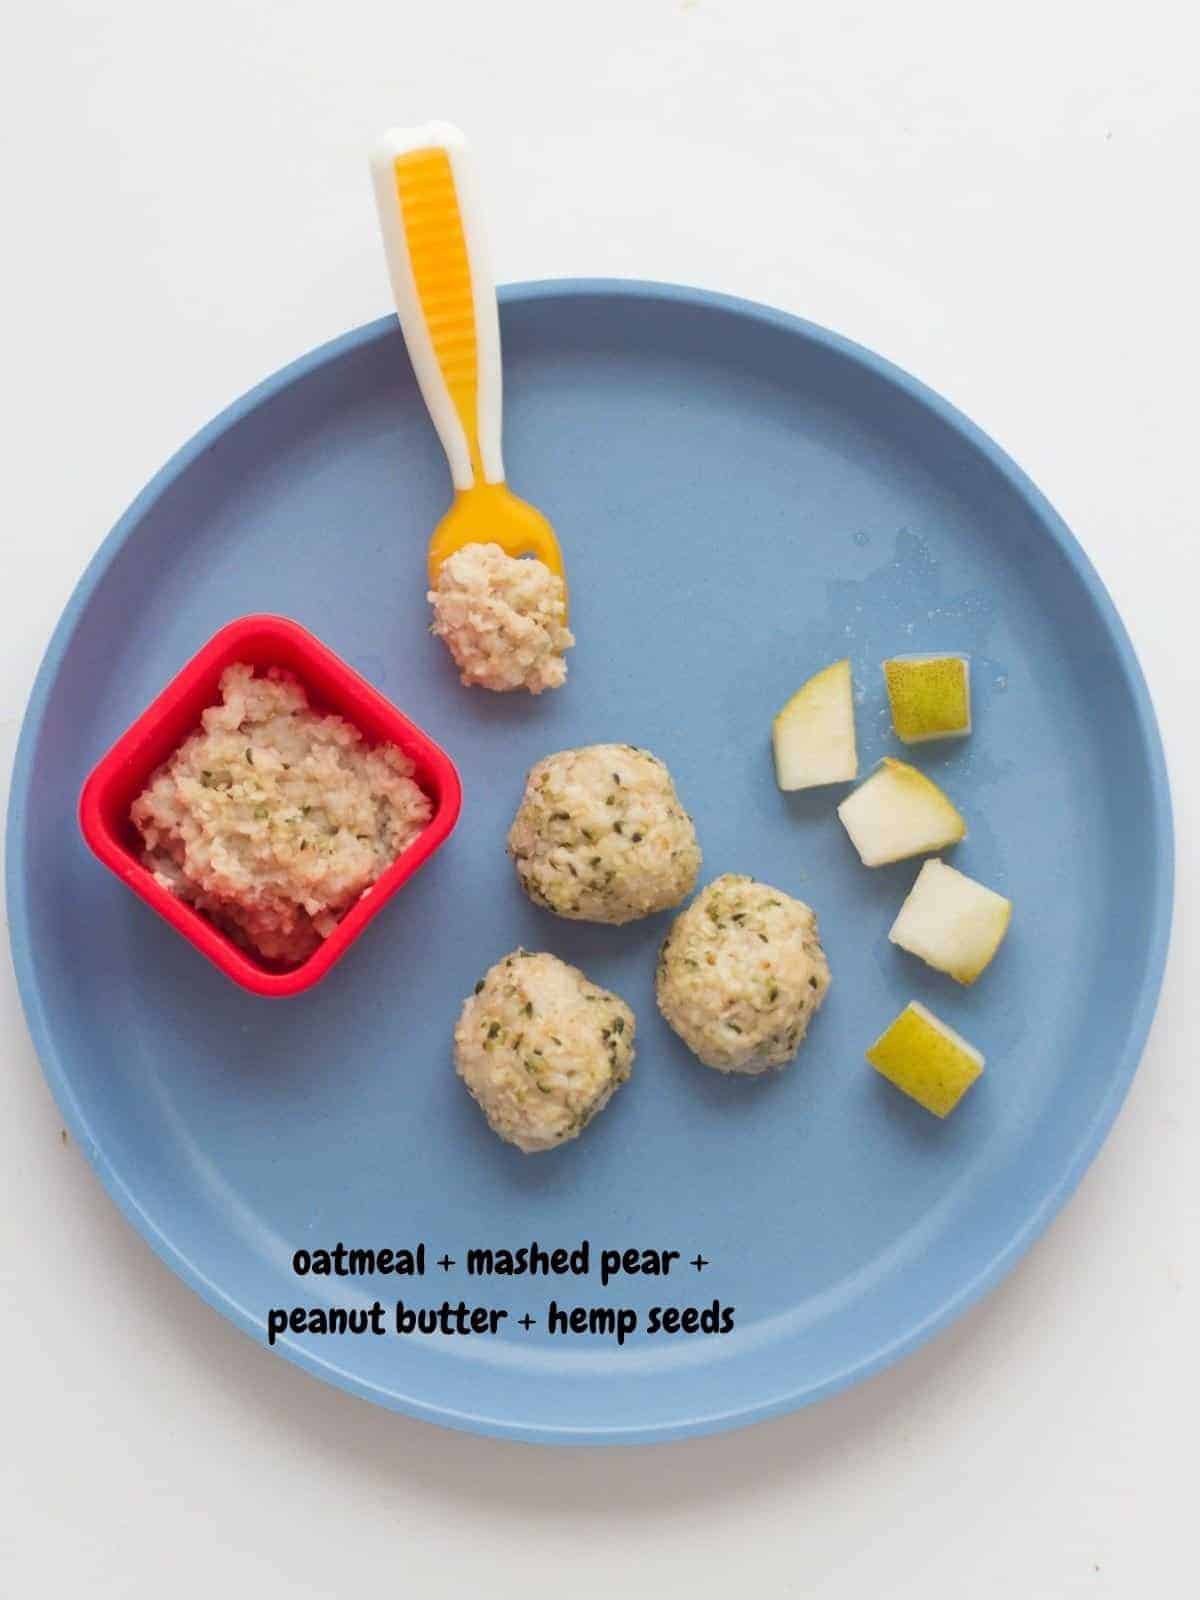 oatmeal mixed with mashed pear, peanut butter and hemp seeds served in a small red container as well as rolled into balls.